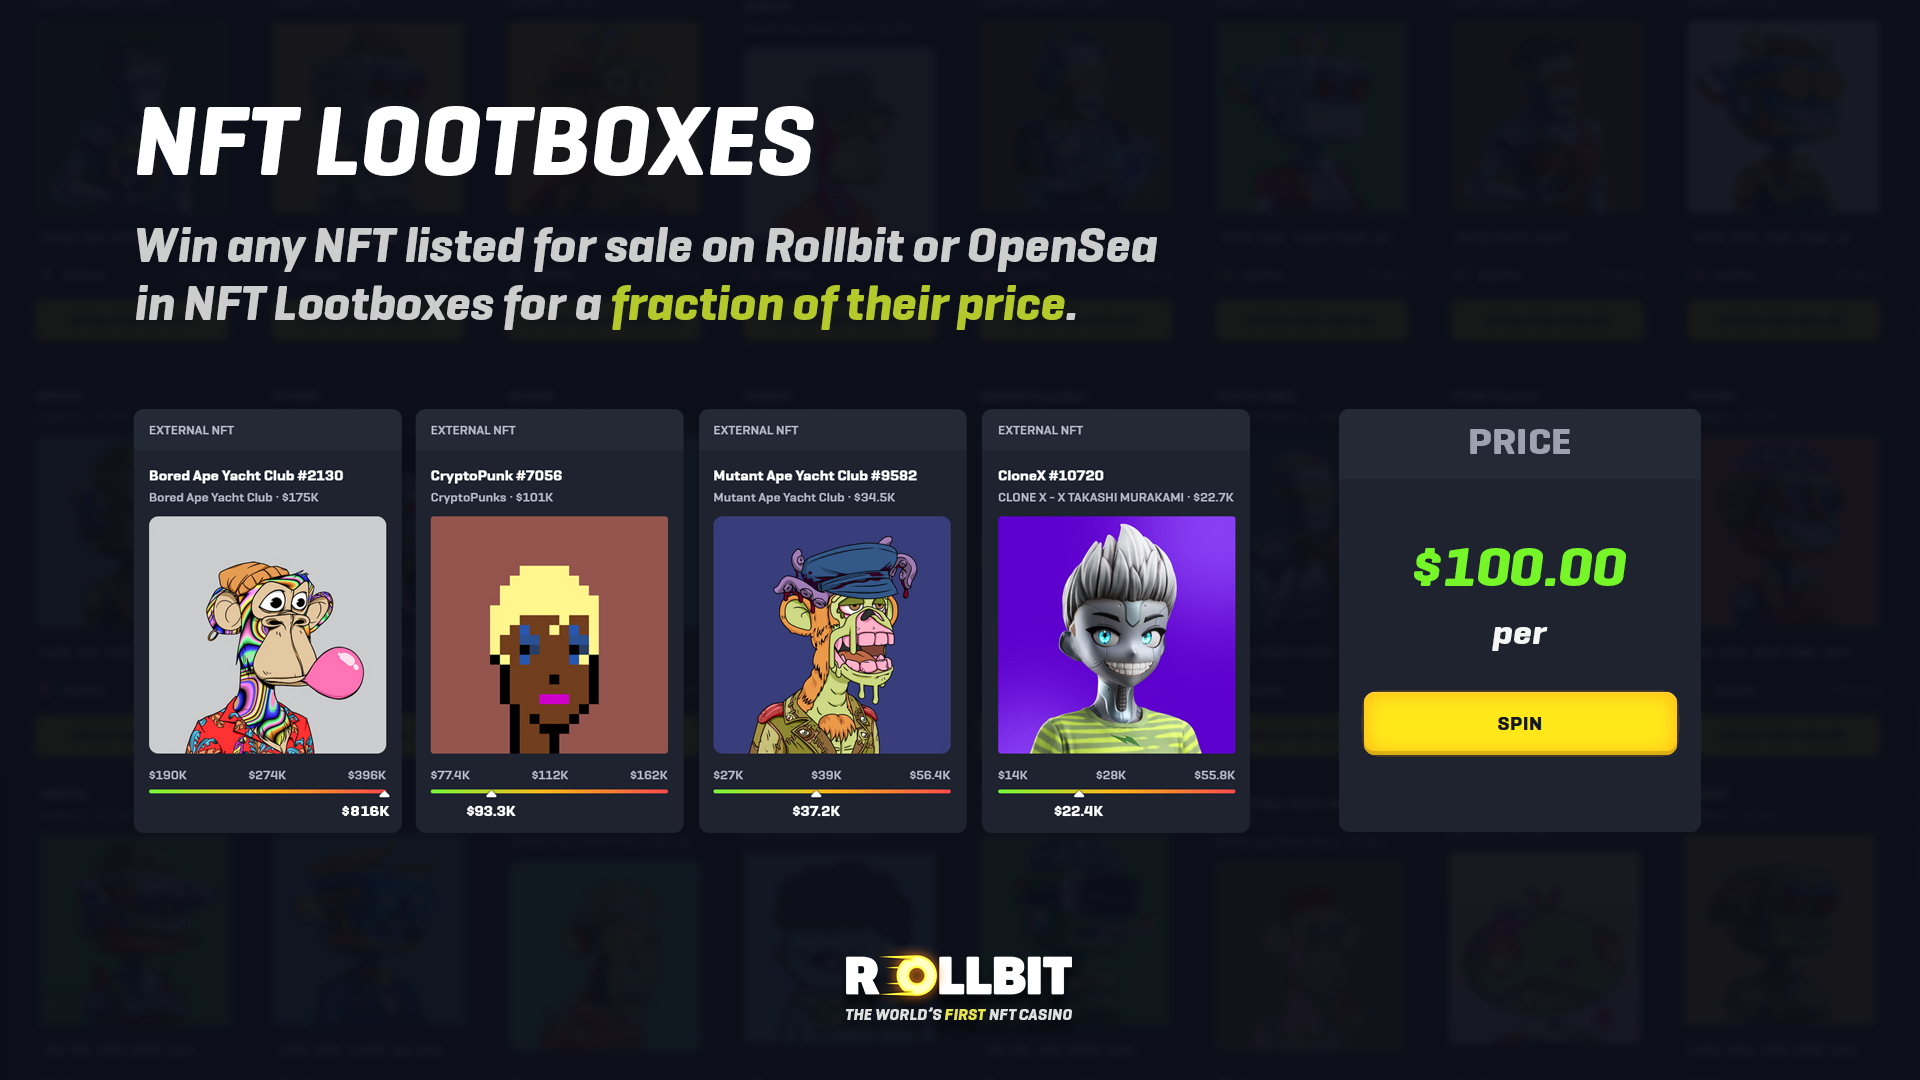 NFT Lootboxes: Win ANY NFT listed for sale on OpenSea